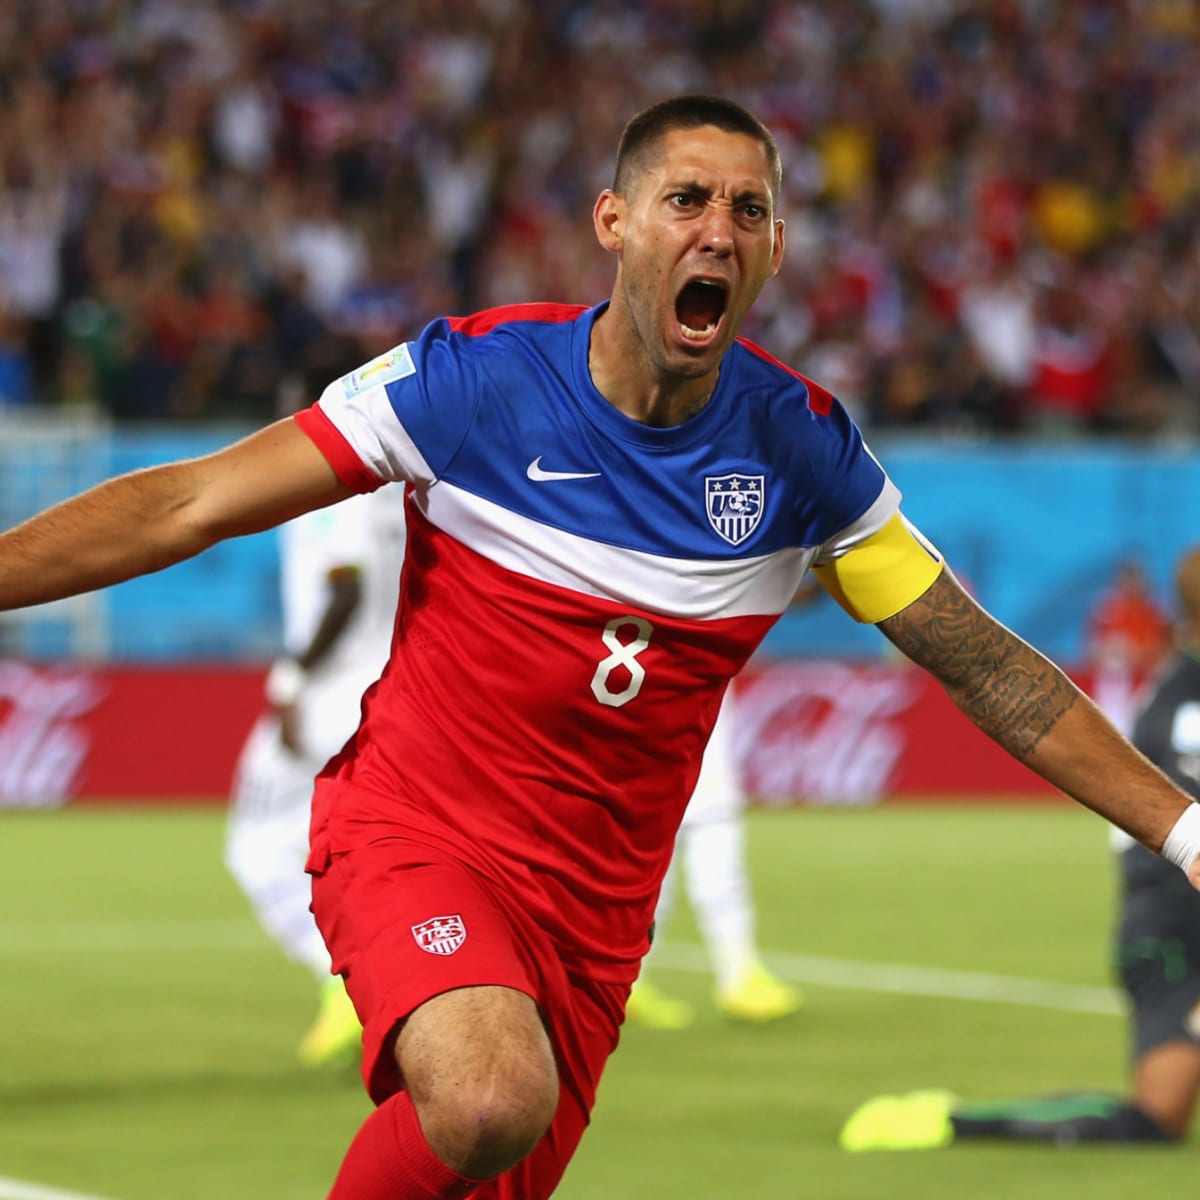 Interview: Clint Dempsey on his health status prior to the New